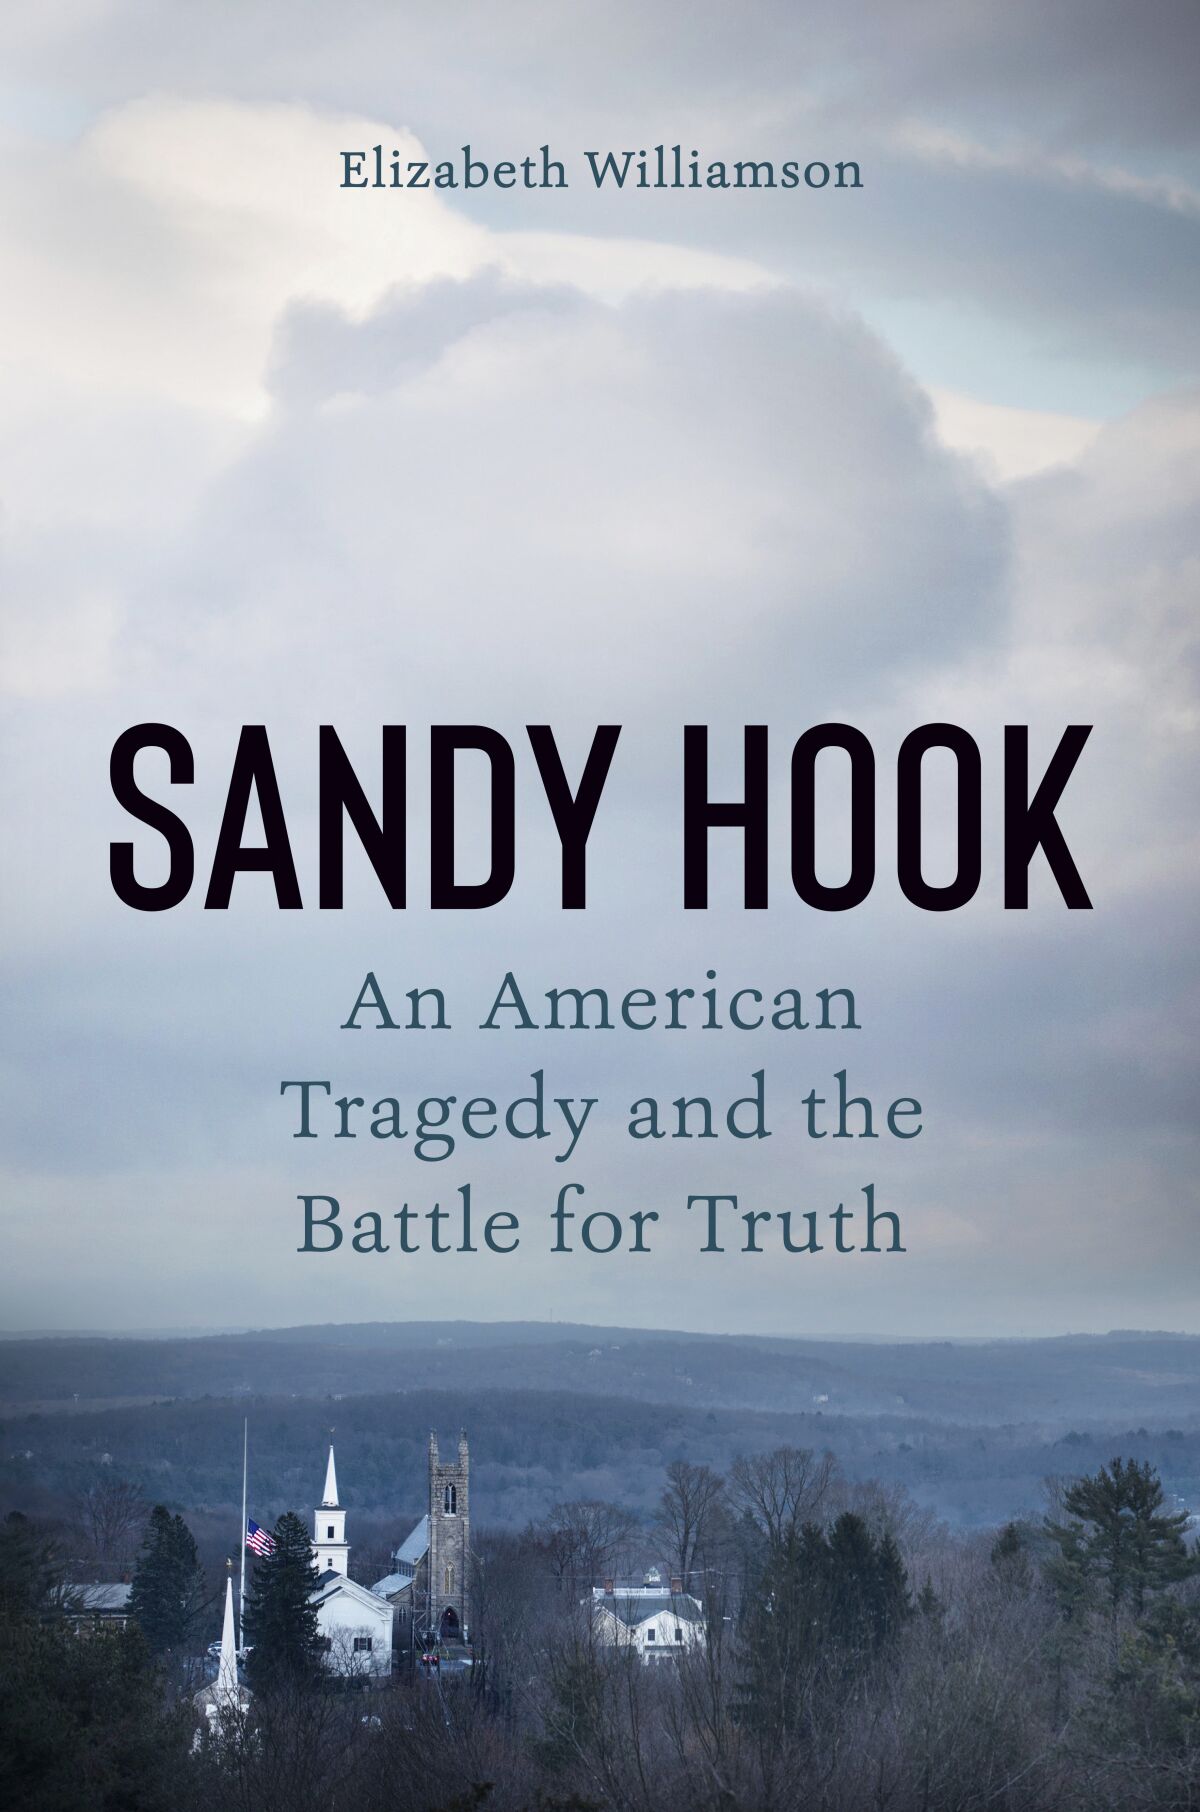 This image released by Dutton shows "Sandy Hook: An American Tragedy and the Battle of Truth" by Elizabeth Williamson. (Dutton via AP)